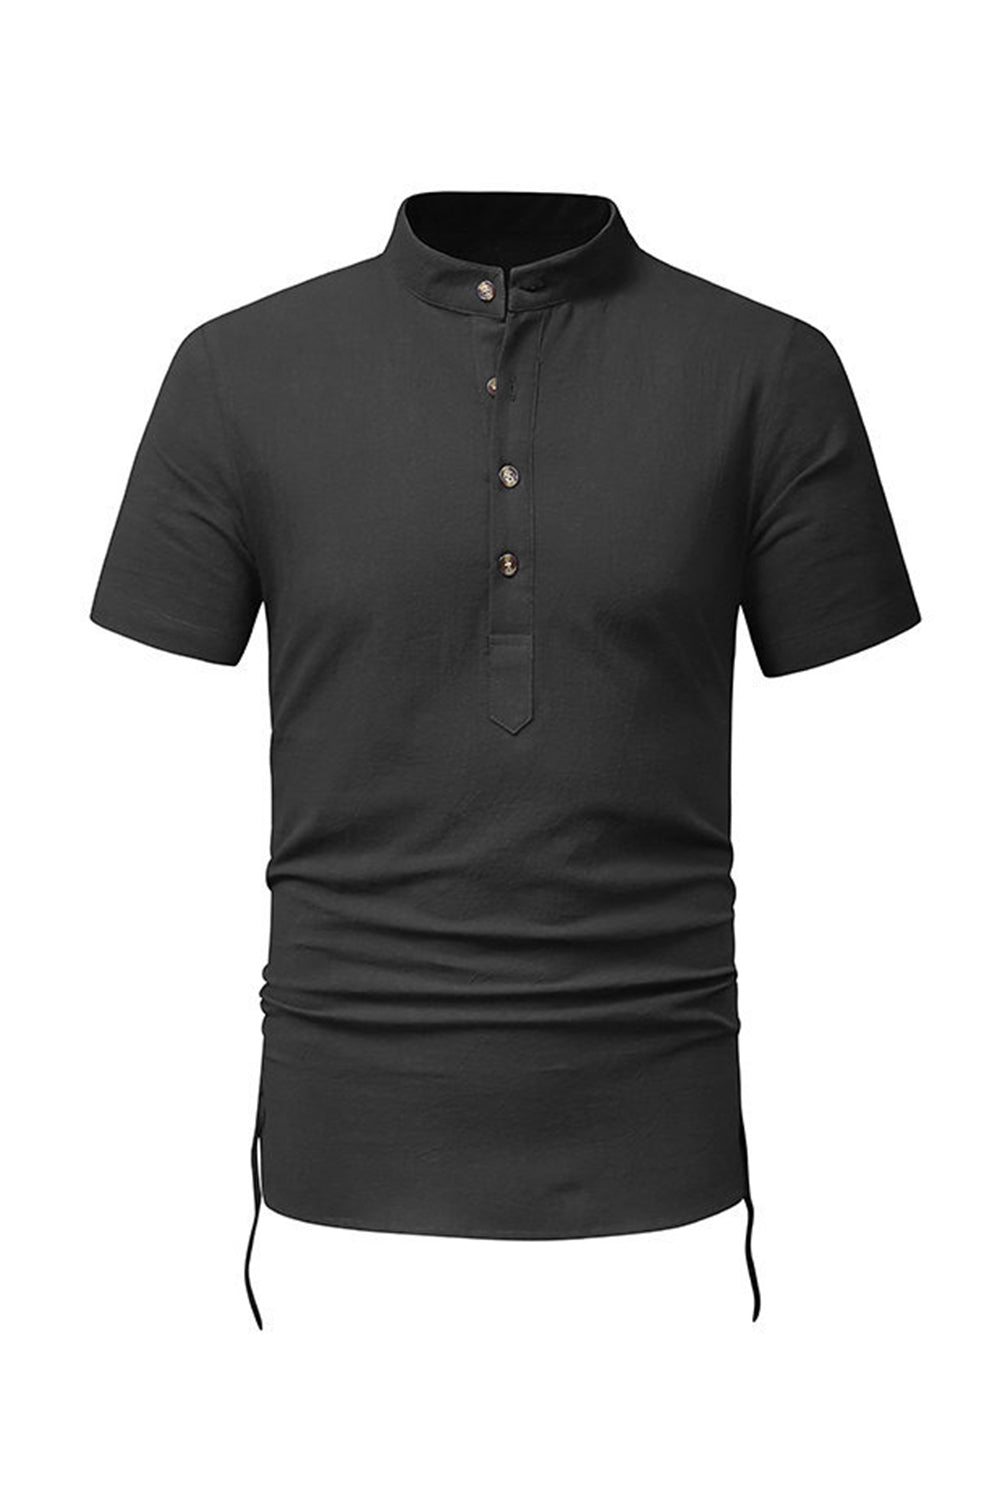 Classic Black Men's Tops with Short Sleeves